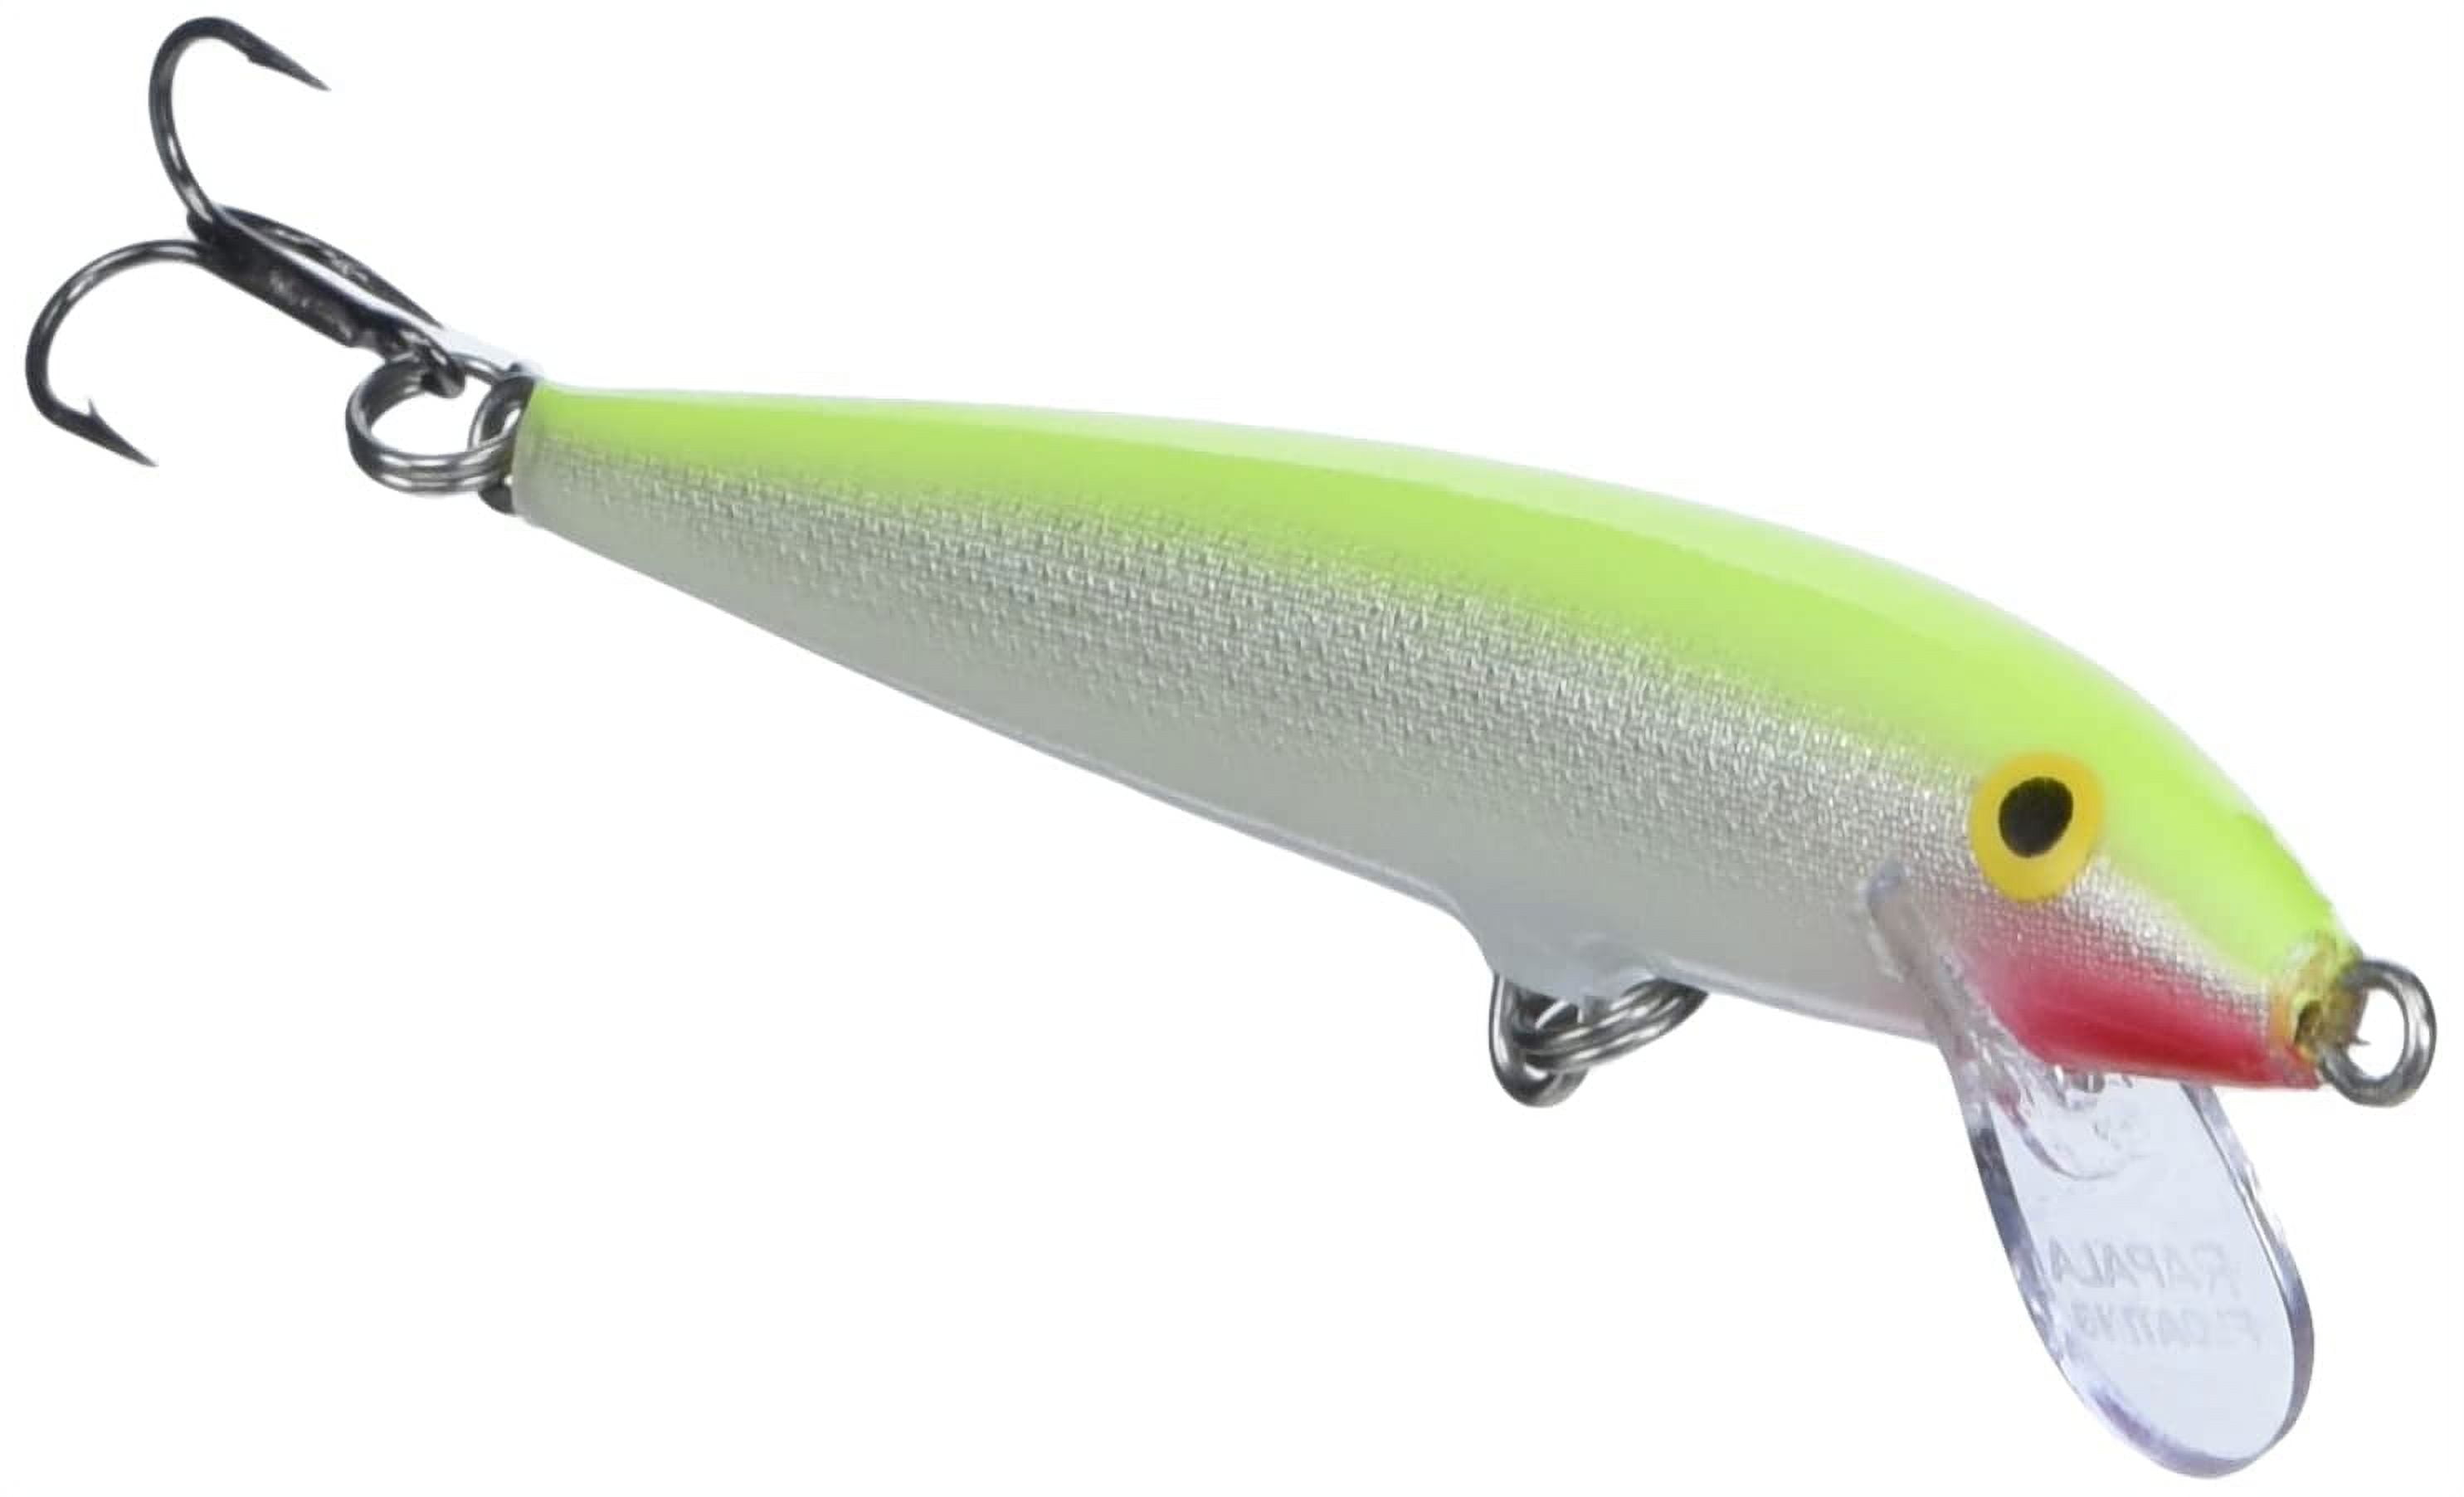 seasky 60g 8 30g 6 metal lip rapala Floating minnow lure with